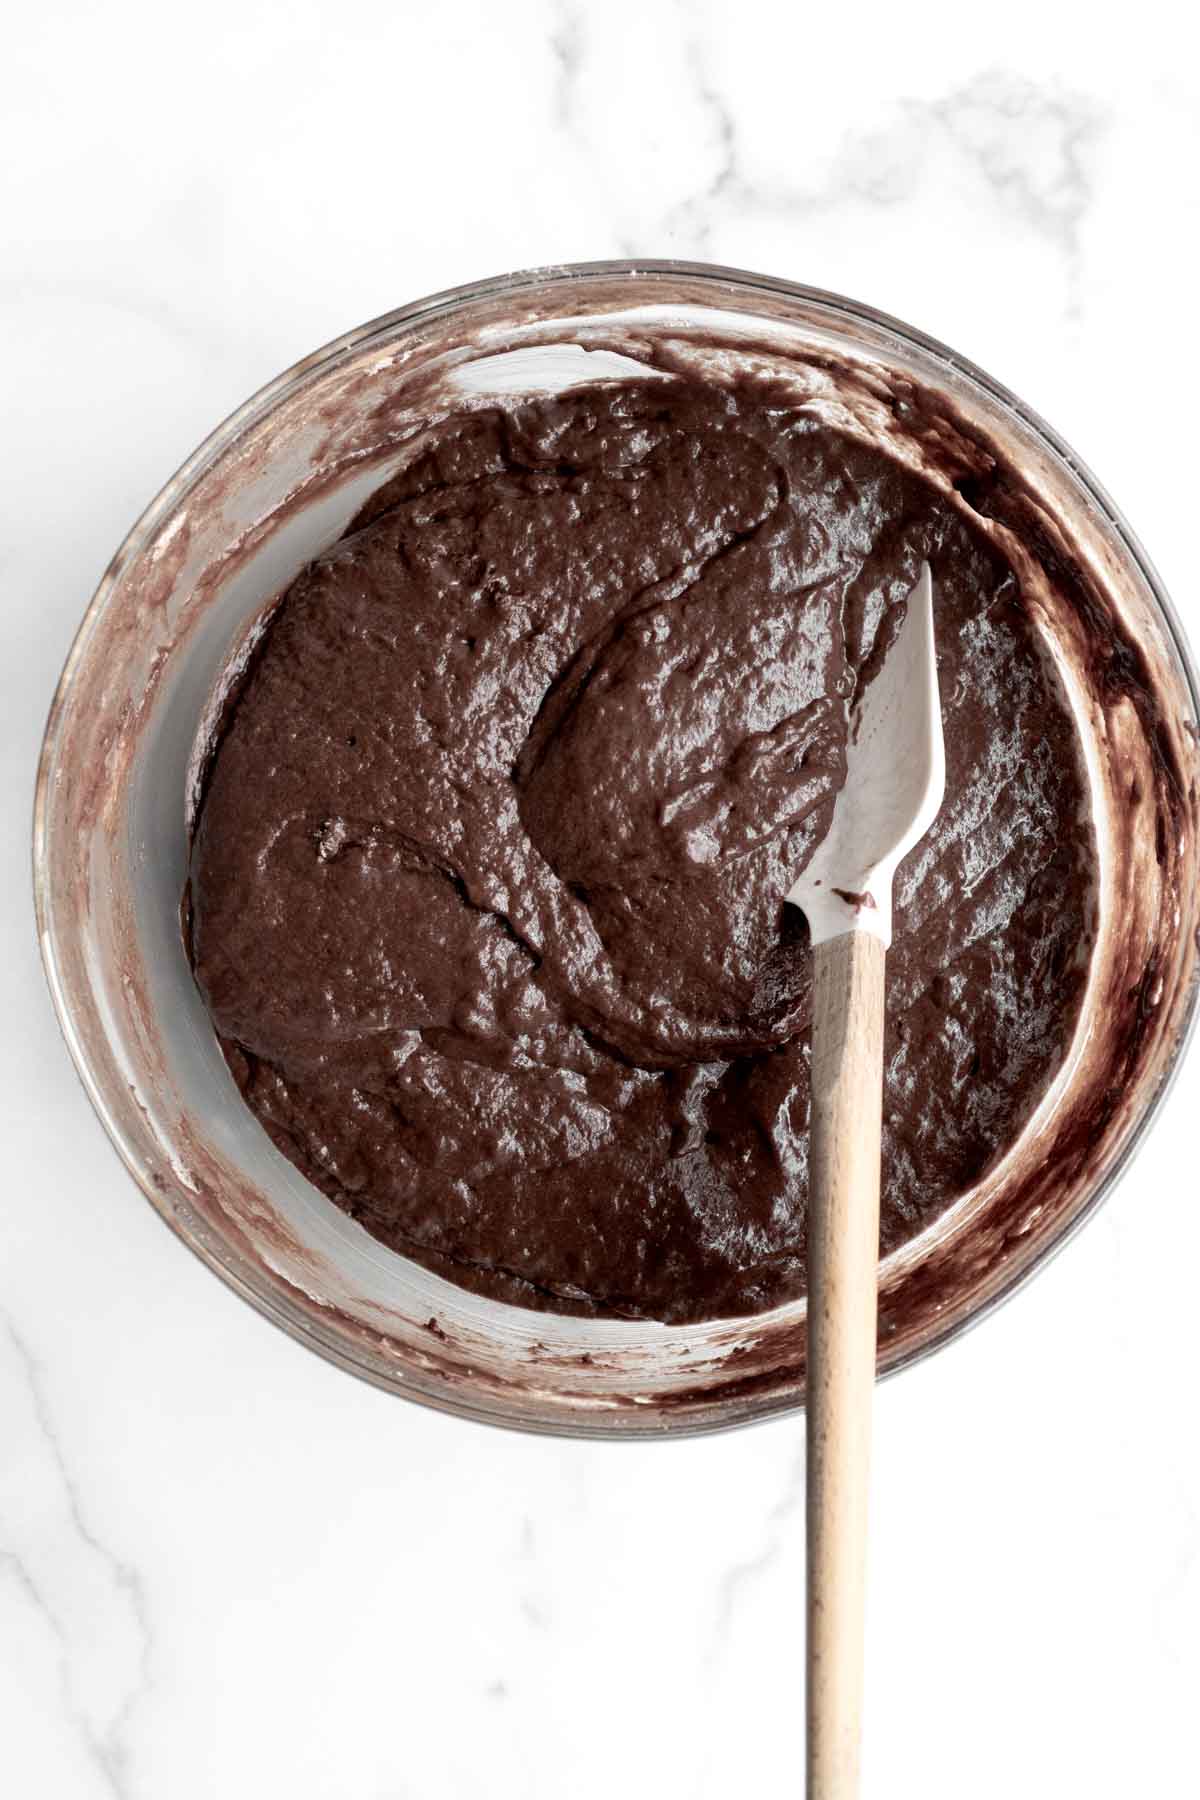 Mixing the chocolate batter in a bowl with a whisk.